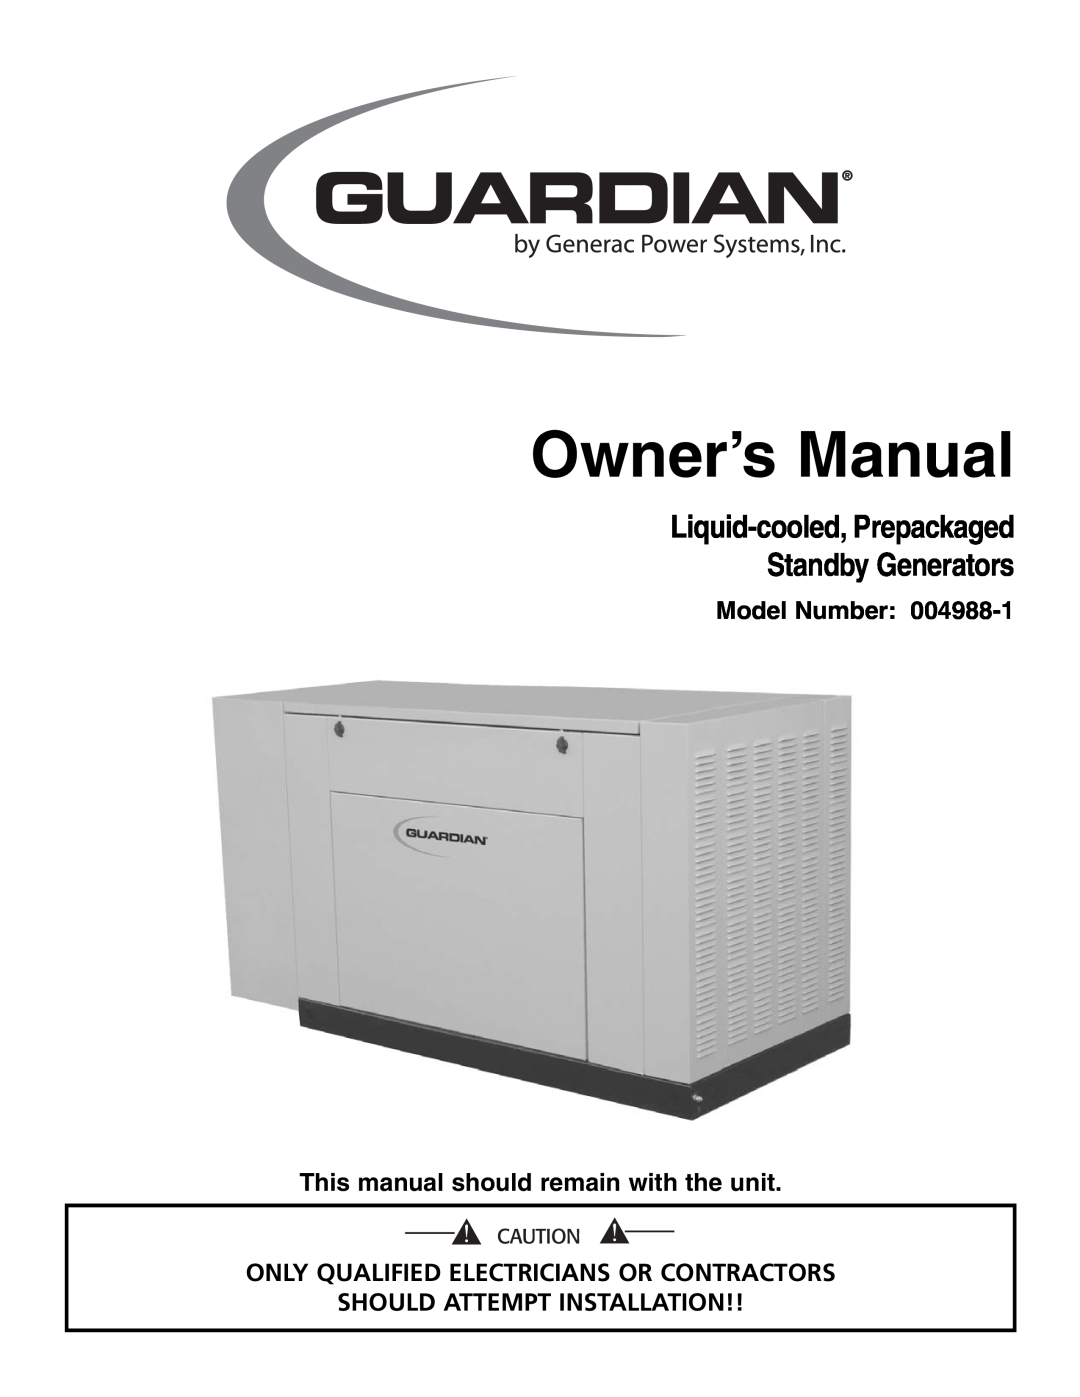 Generac Power Systems 004988-1 owner manual Liquid-cooled,Prepackaged Standby Generators, Model Number 